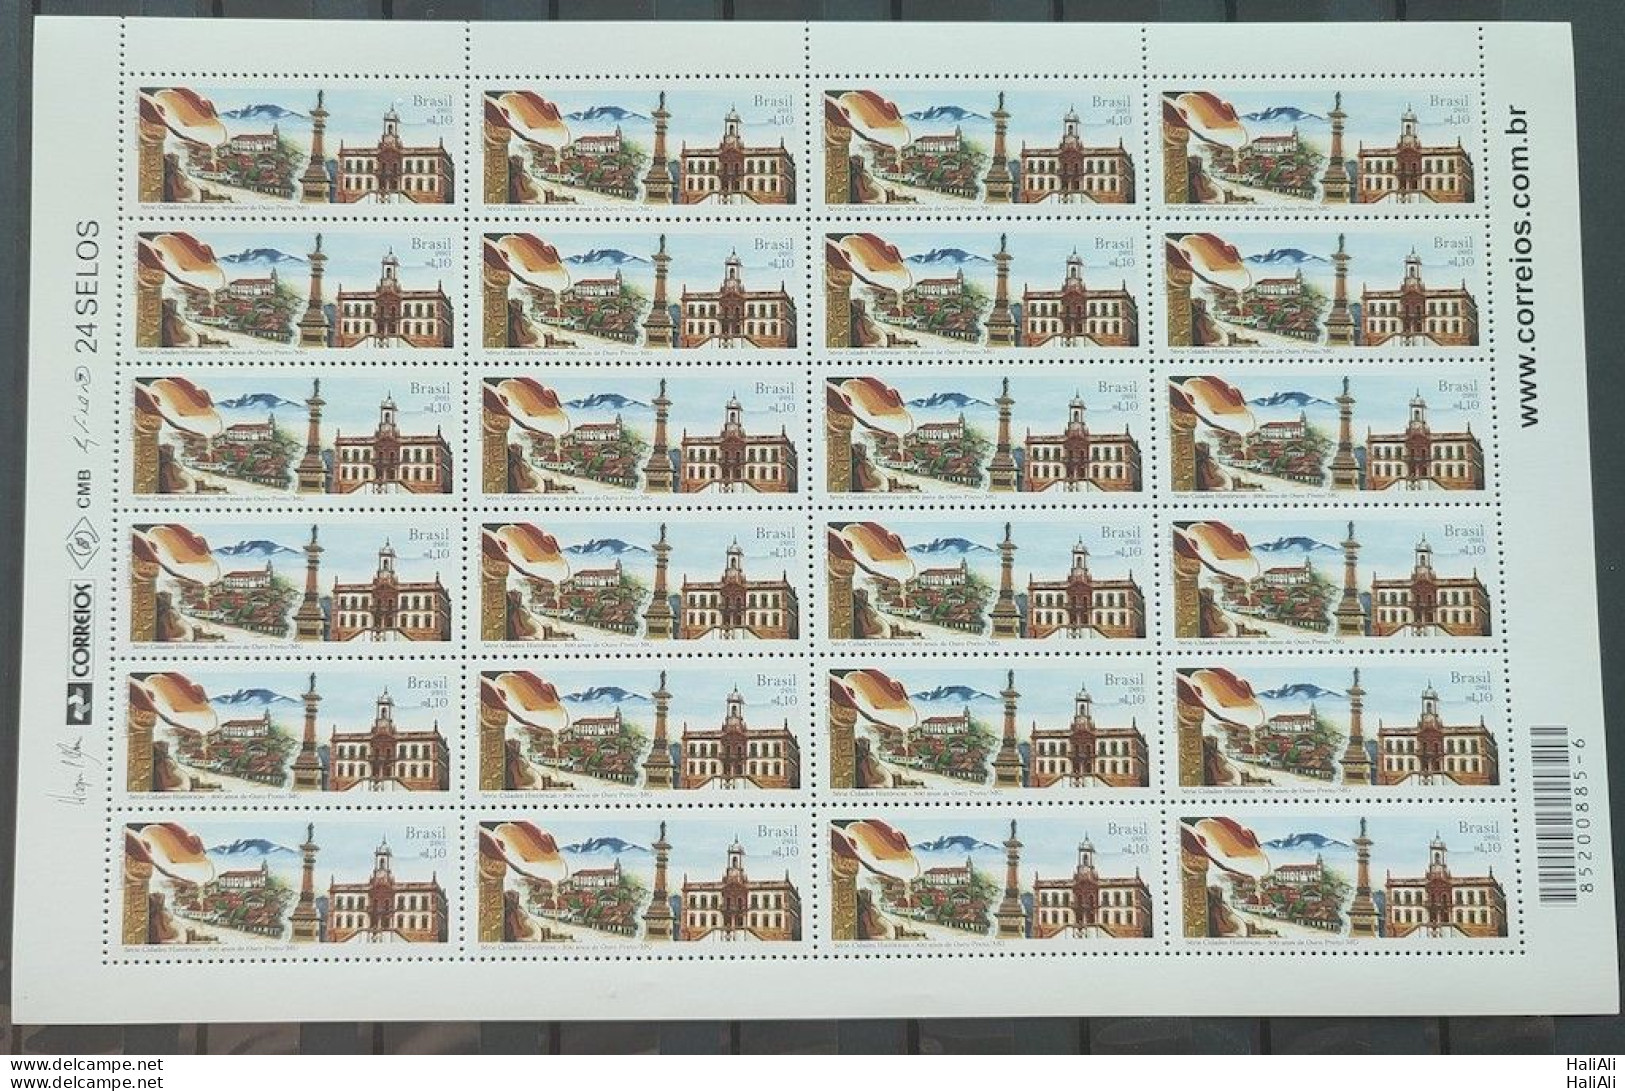 C 3097 Brazil Stamp Historical Cities Ouro Preto MG 2011 Sheet - Neufs